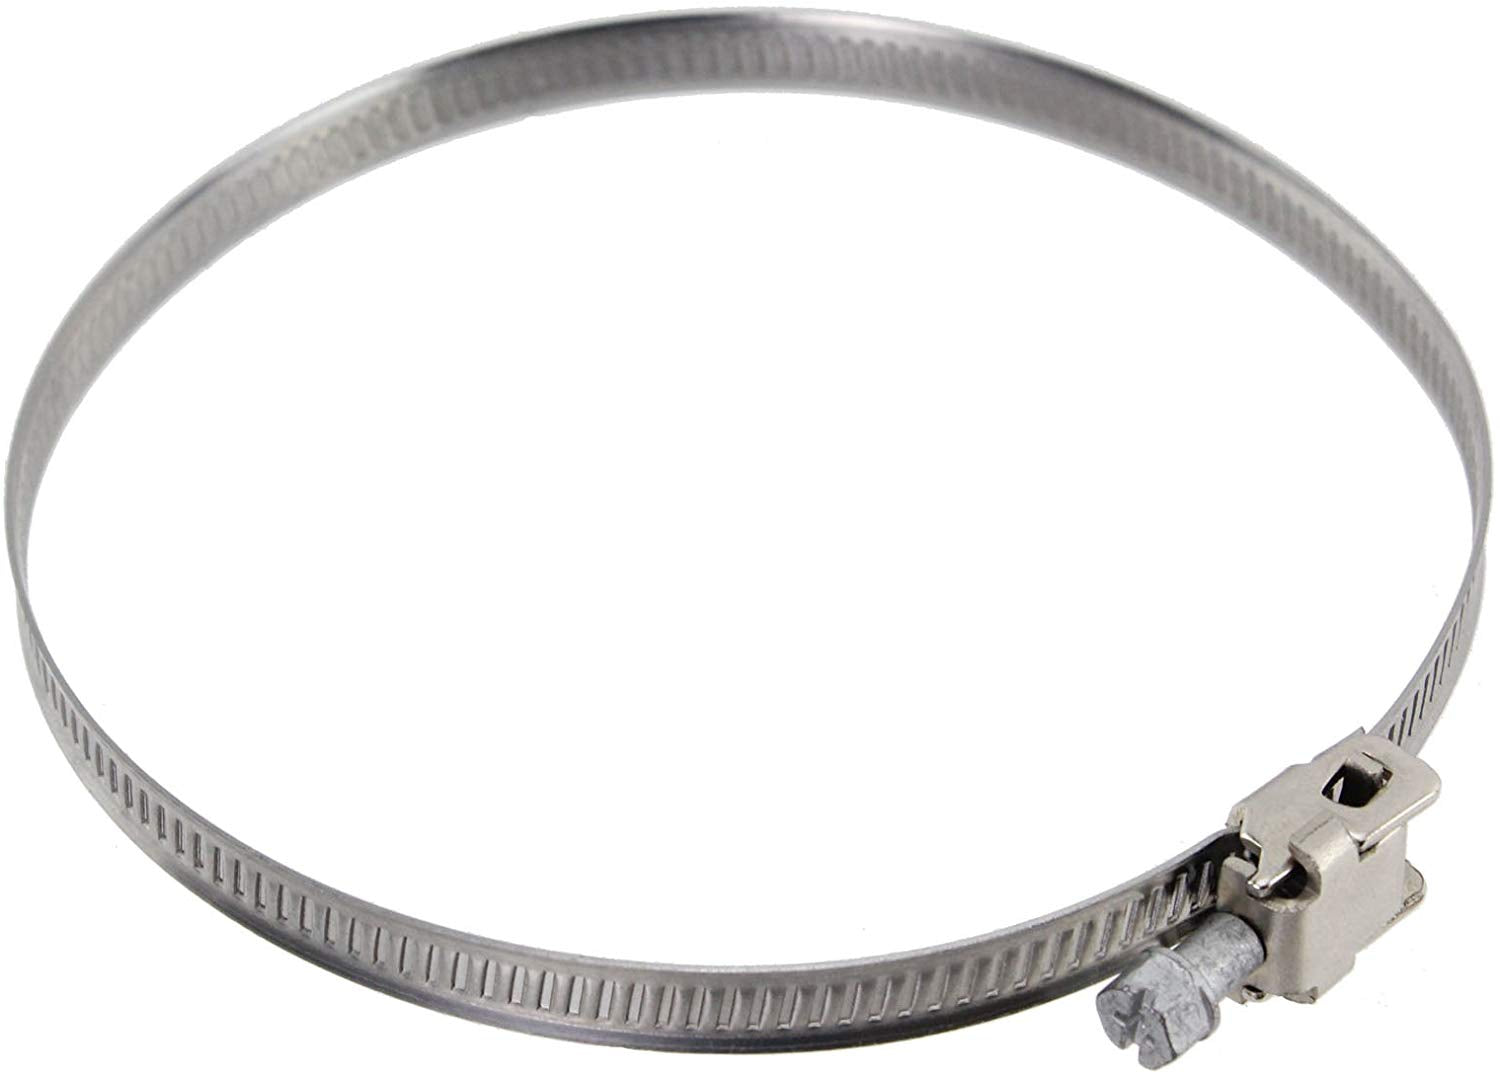 Condenser Box & Extra Long Hose Kit With Connection Ring for Hoover Tumble Dryer (4" / 100mm Diameter / 6M Hose)